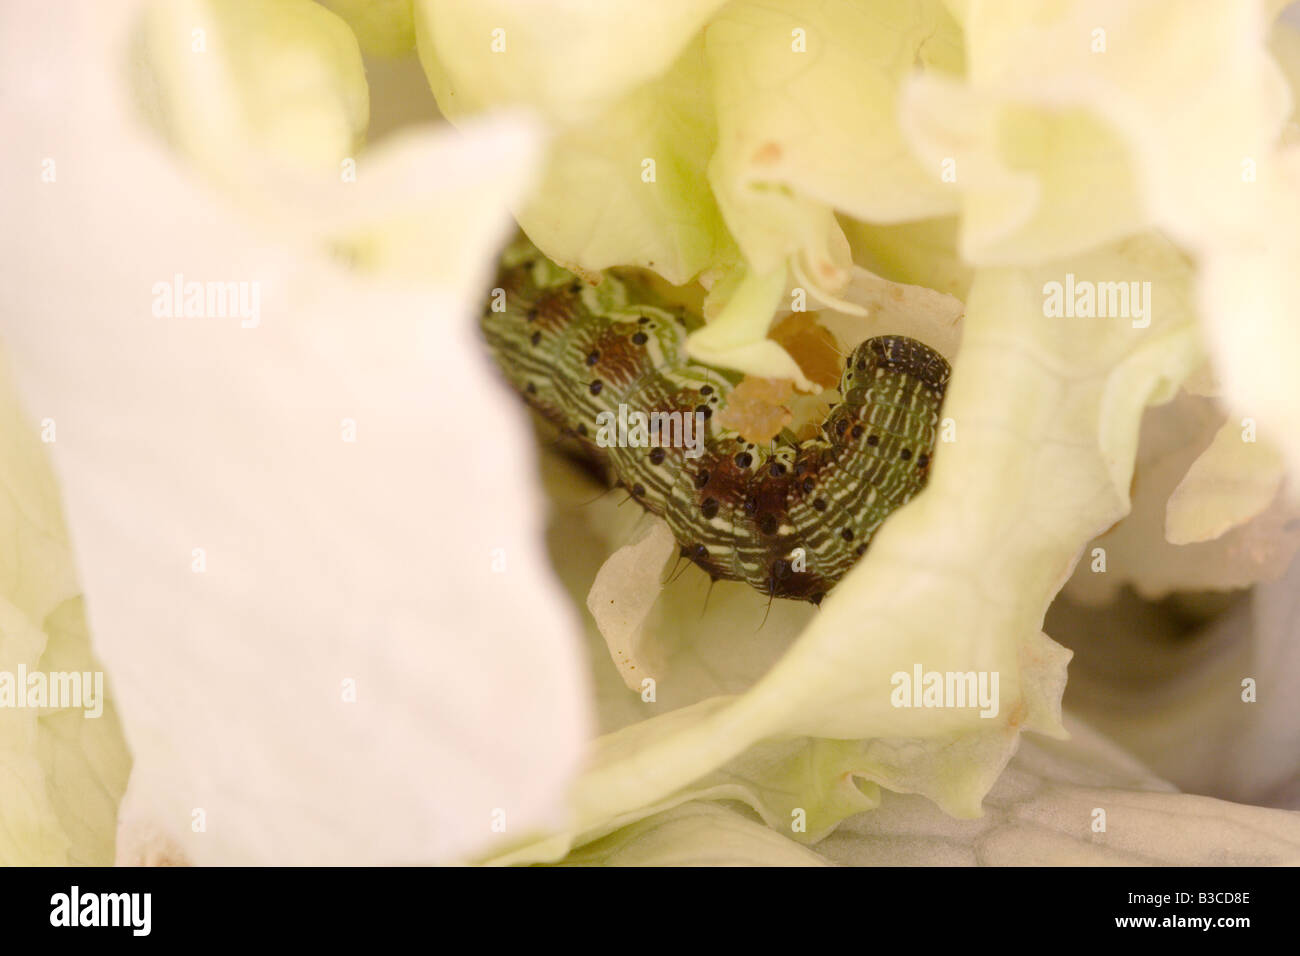 Bollworm larva found inside a lettuce purchased from a UK supermarket. Stock Photo